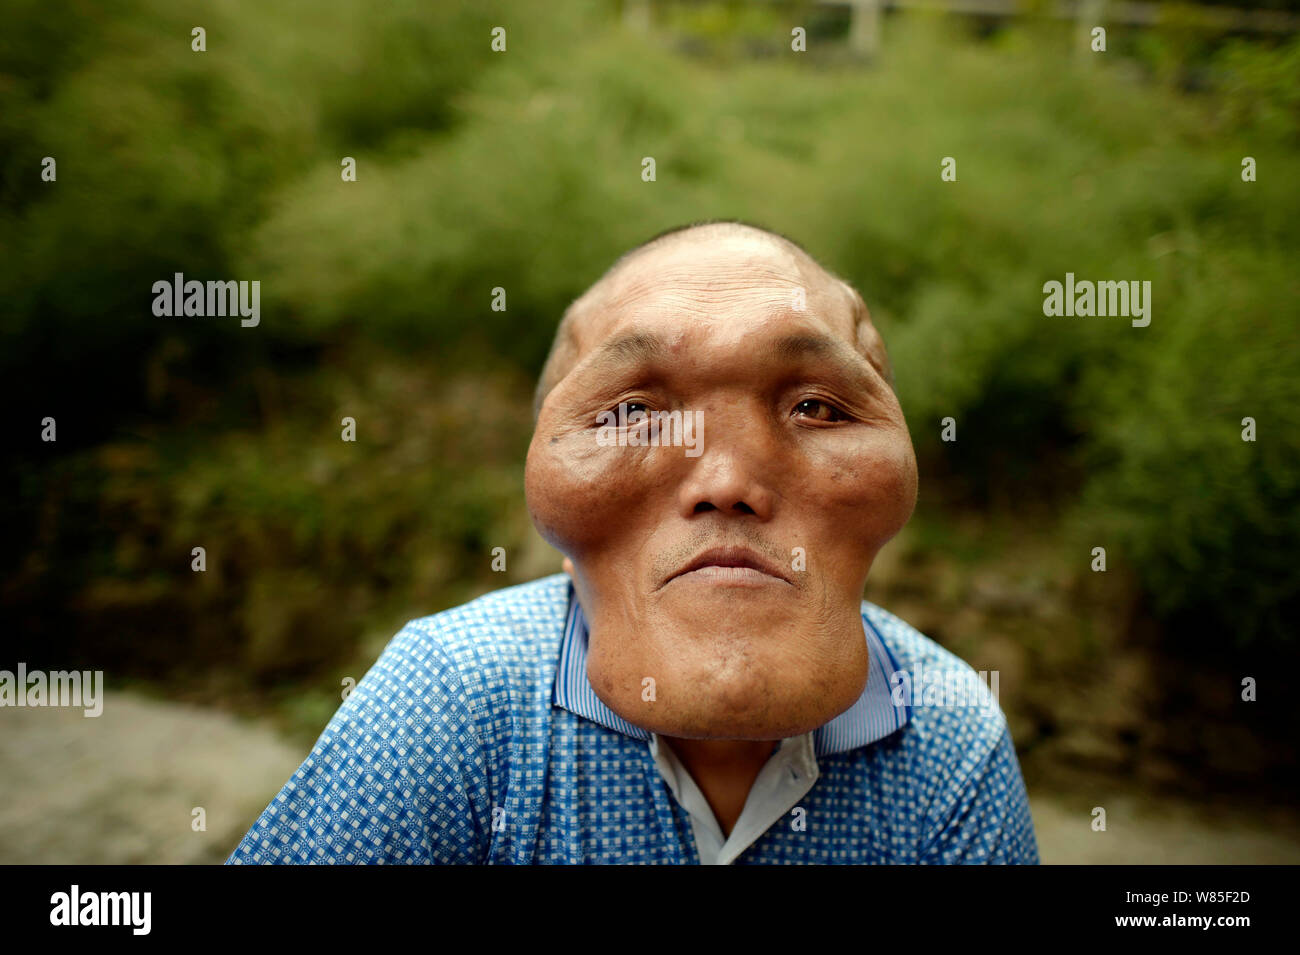 Chinese villager Xia Yuanhai who has an alien-like deformed face poses for photos at home in Laotu village, Changling town, Chongqing, China, 23 Septe Stock Photo